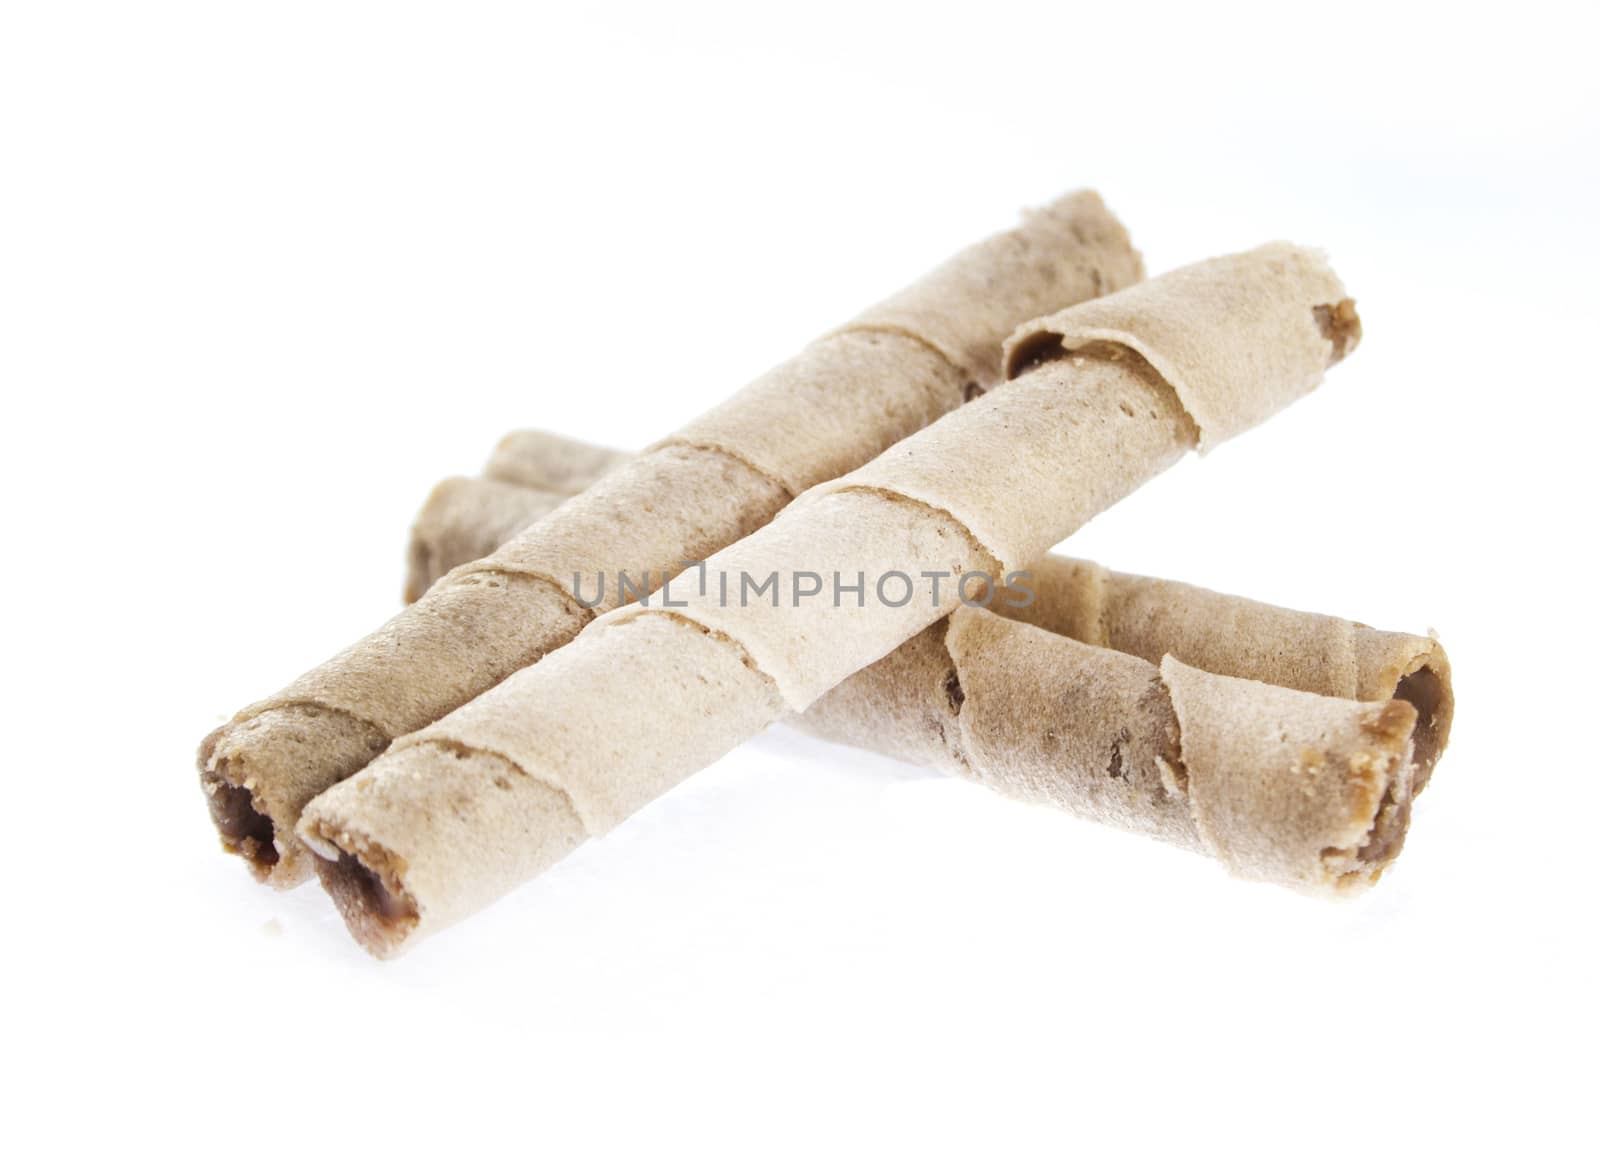 Striped wafer rolls filled with chocolate isolated on white